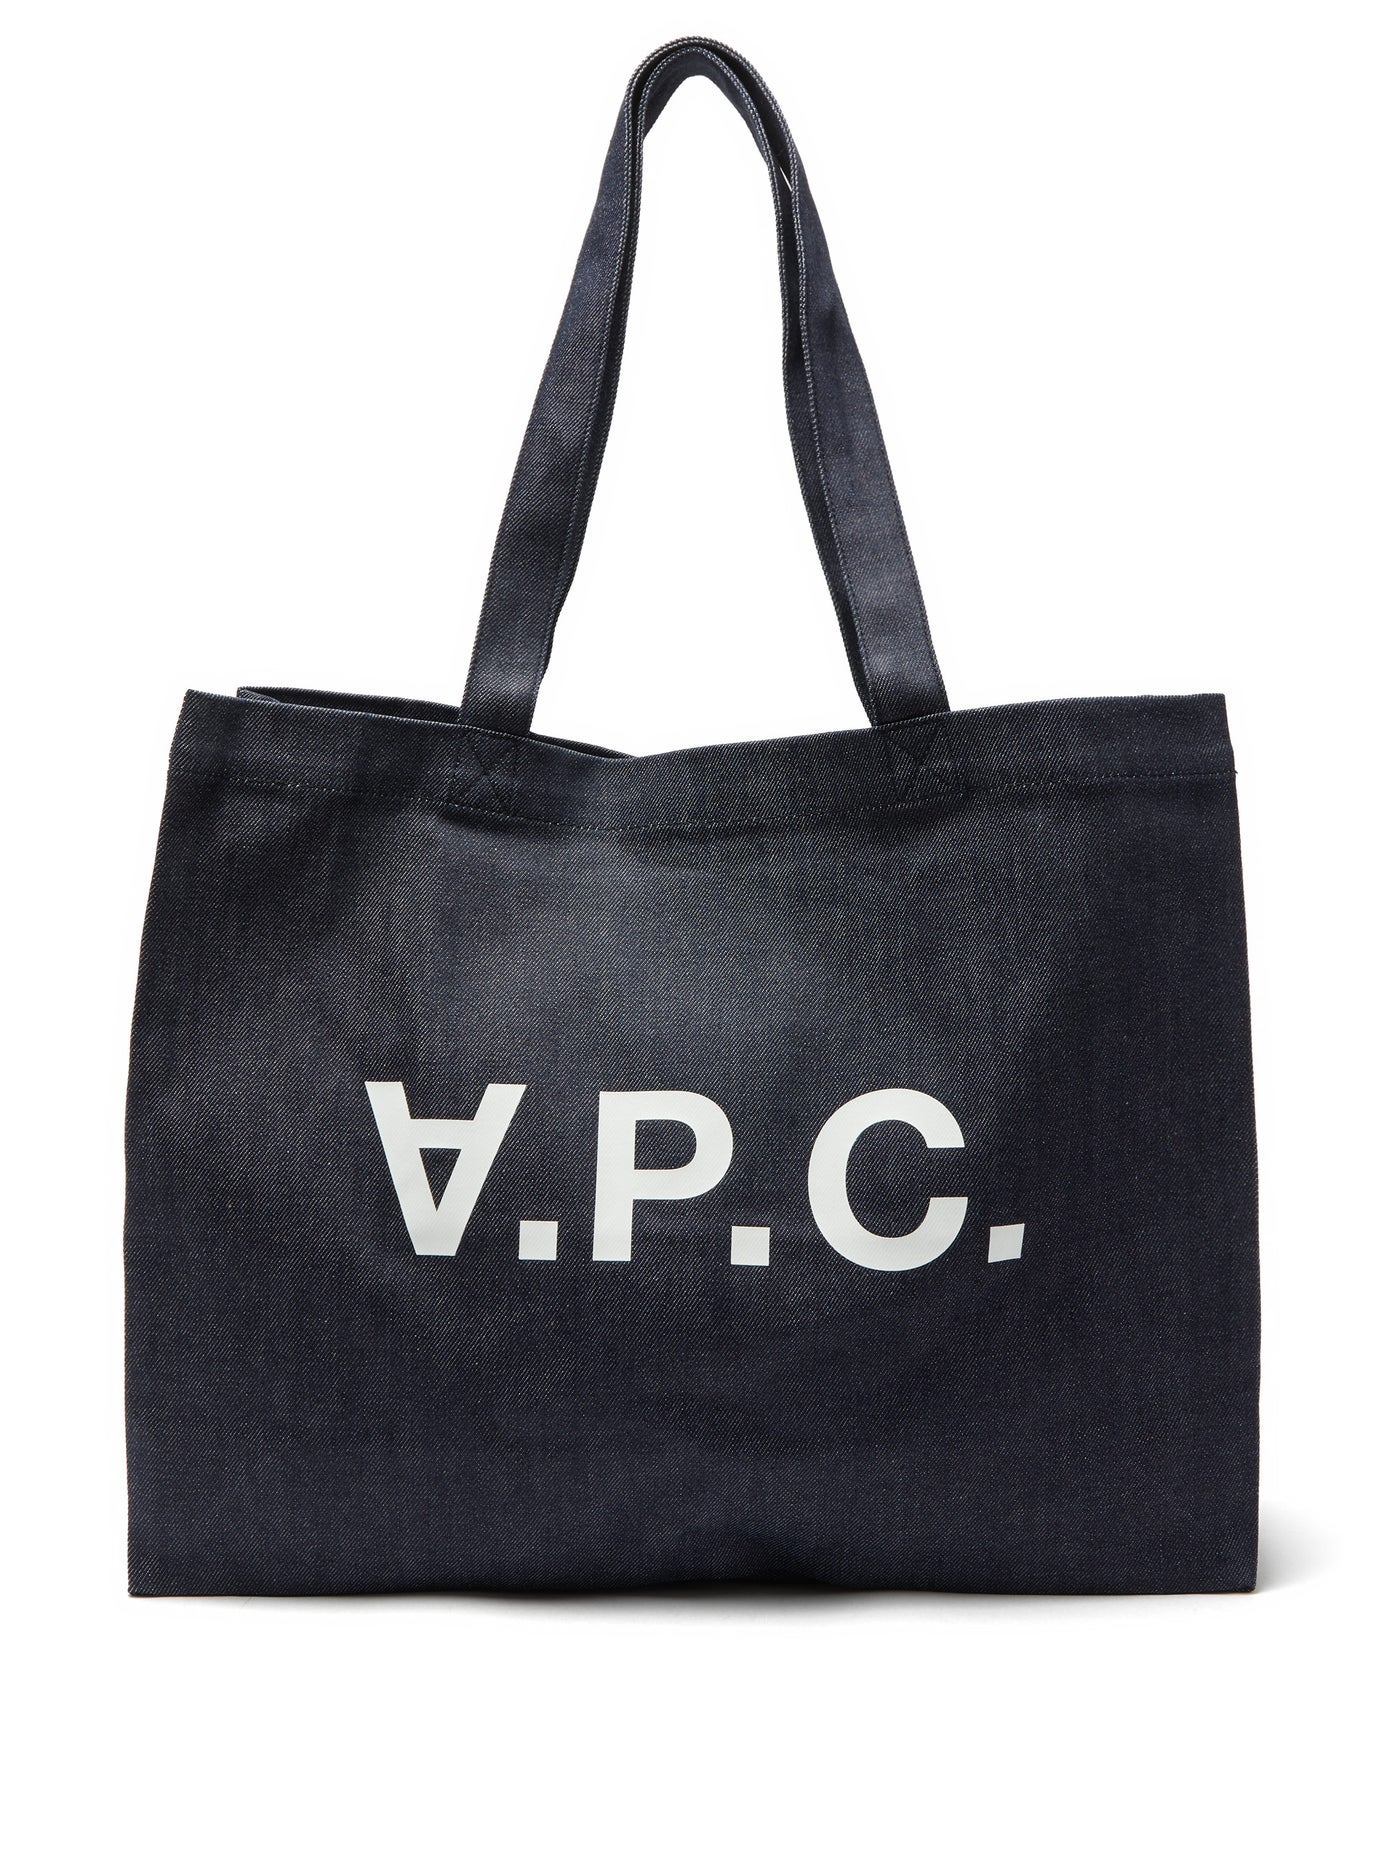 A.P.C + Bags That Carry All Your Crap, But Aren't Grotty Canvas Totes